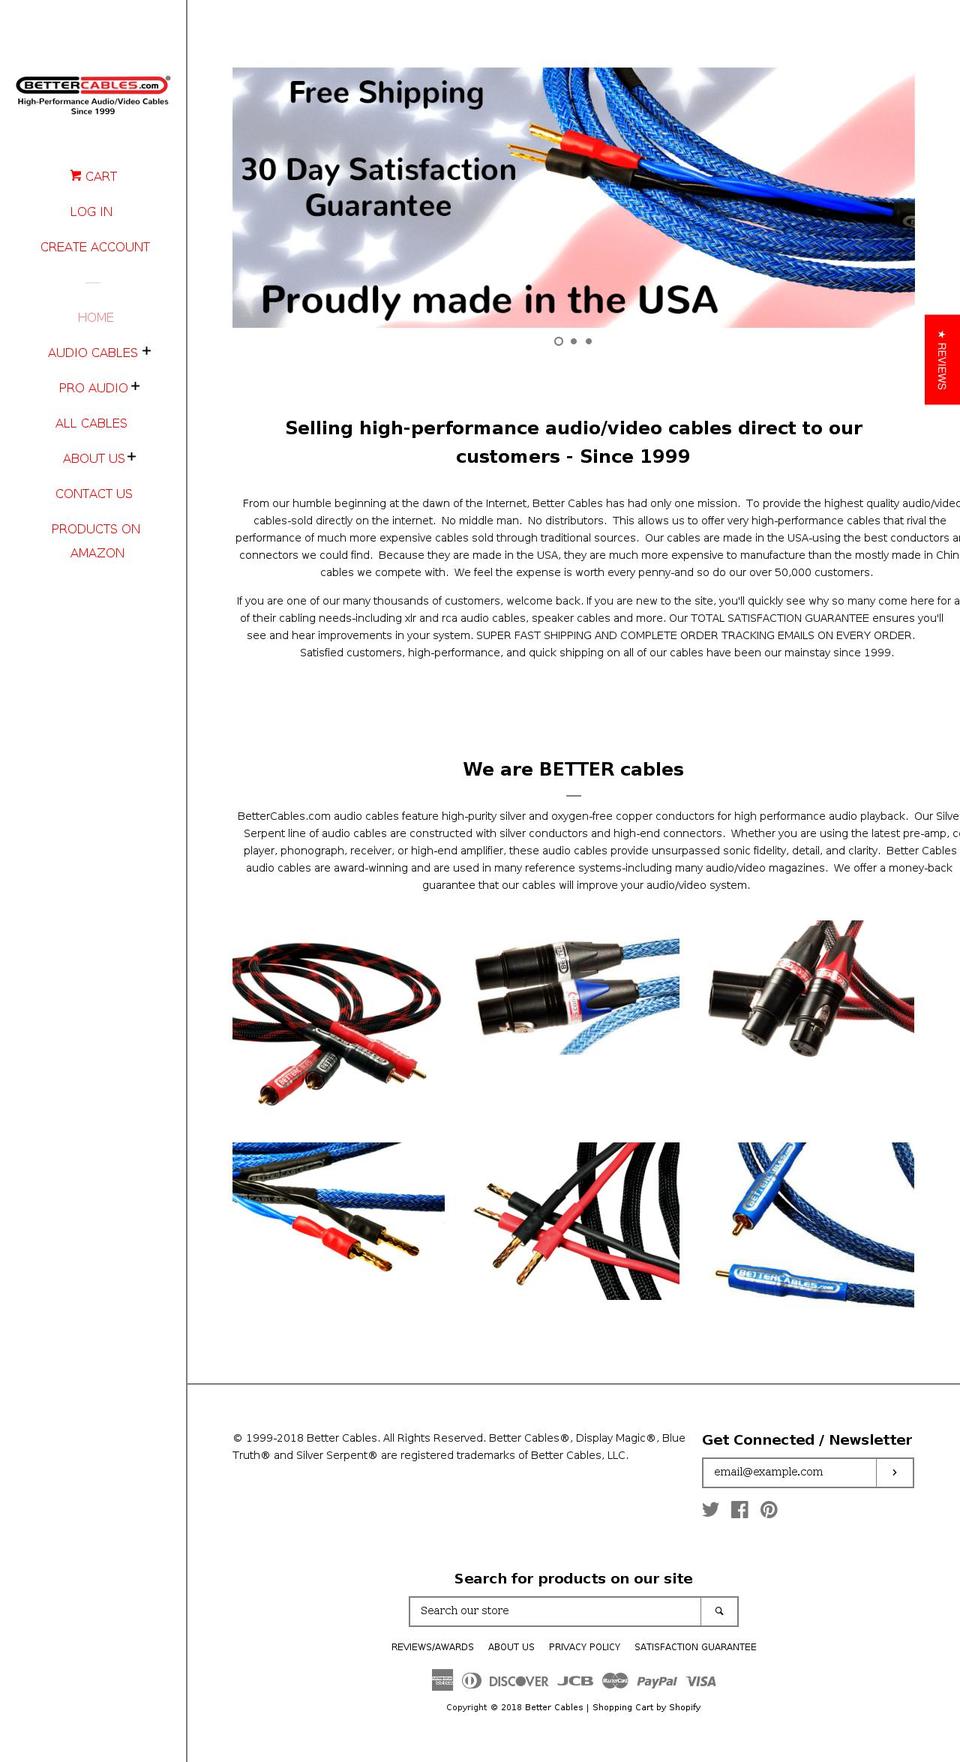 Current Theme - Pop Shopify theme site example bettercables.us